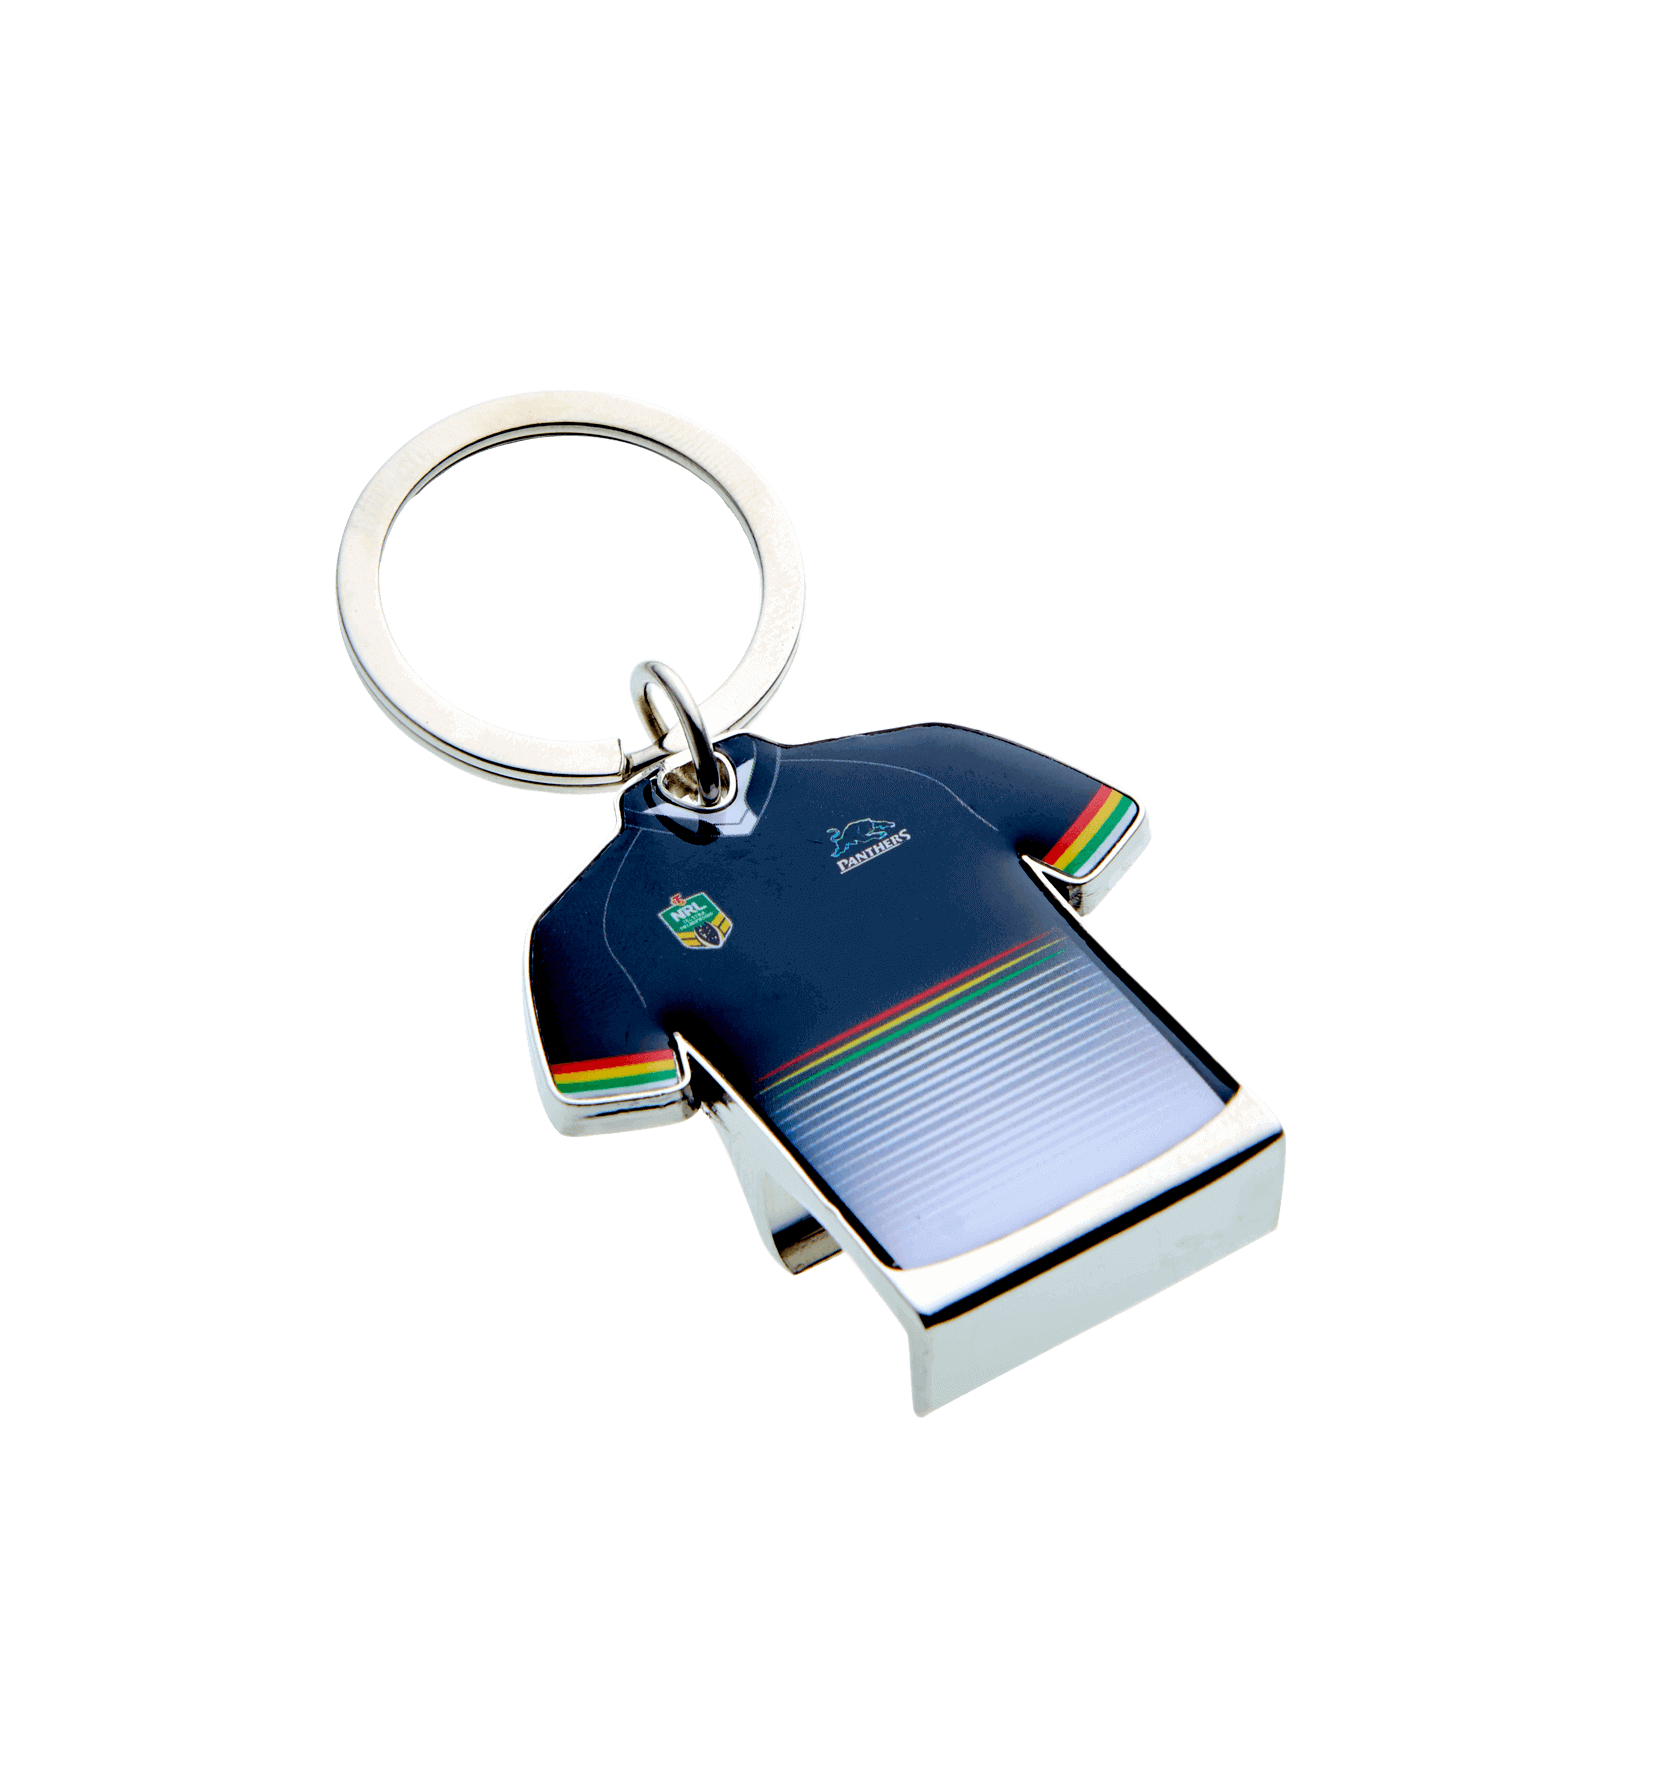 PENRITH PANTHERS NRL TEAM GUERNSEY BOTTLE OPENER KEYRING_PENRITH PANTHERS_STUBBY CLUB